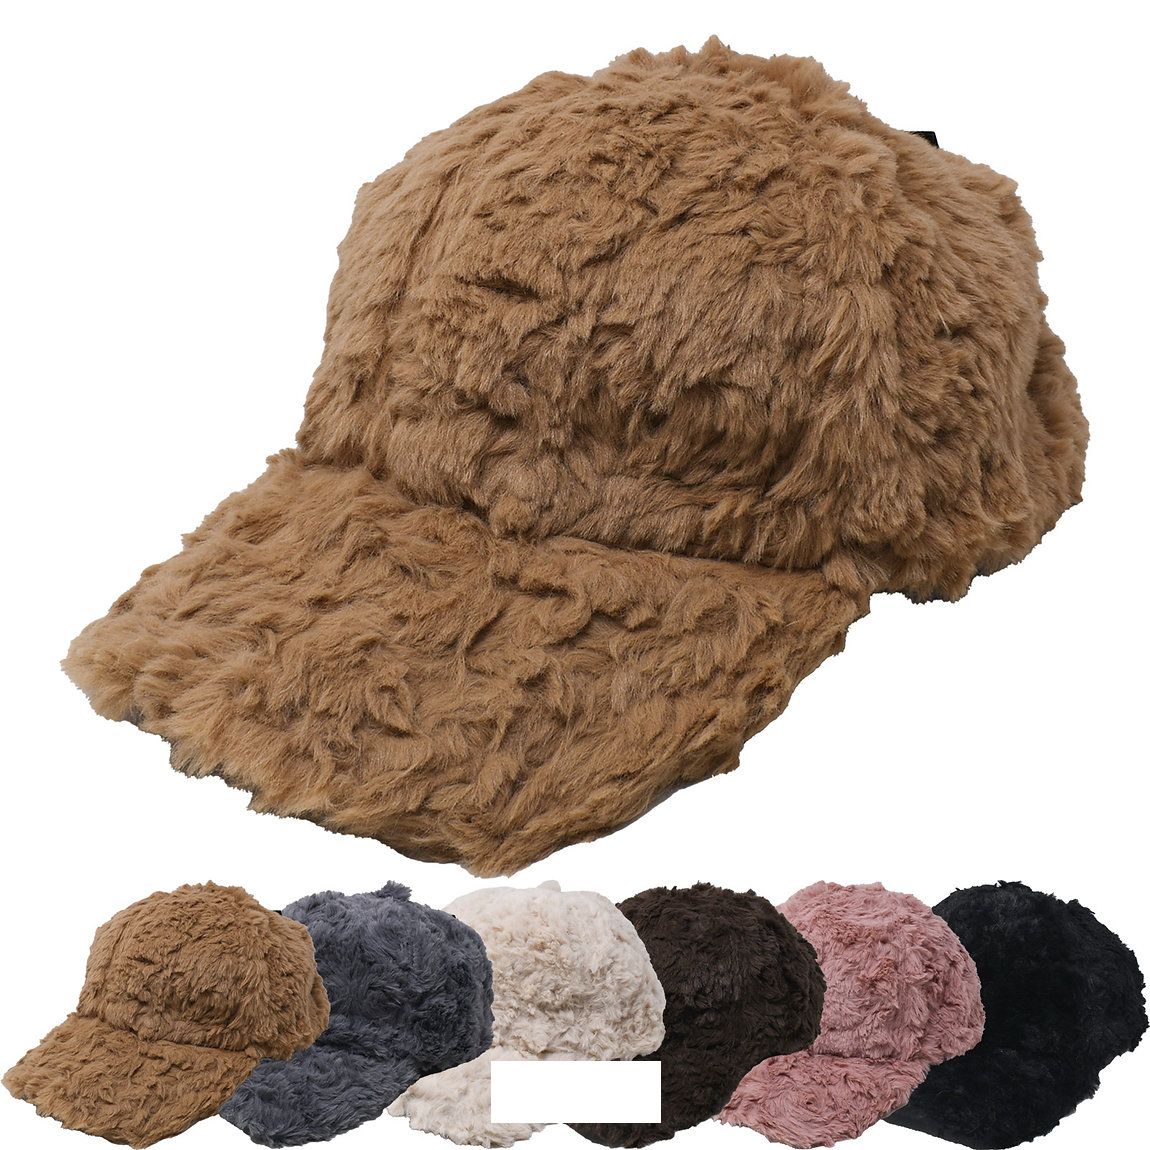 12 Pieces of Women's Winter Sherpa Cap Style Knitted Hats With Fleece Lining In Mixed Colors